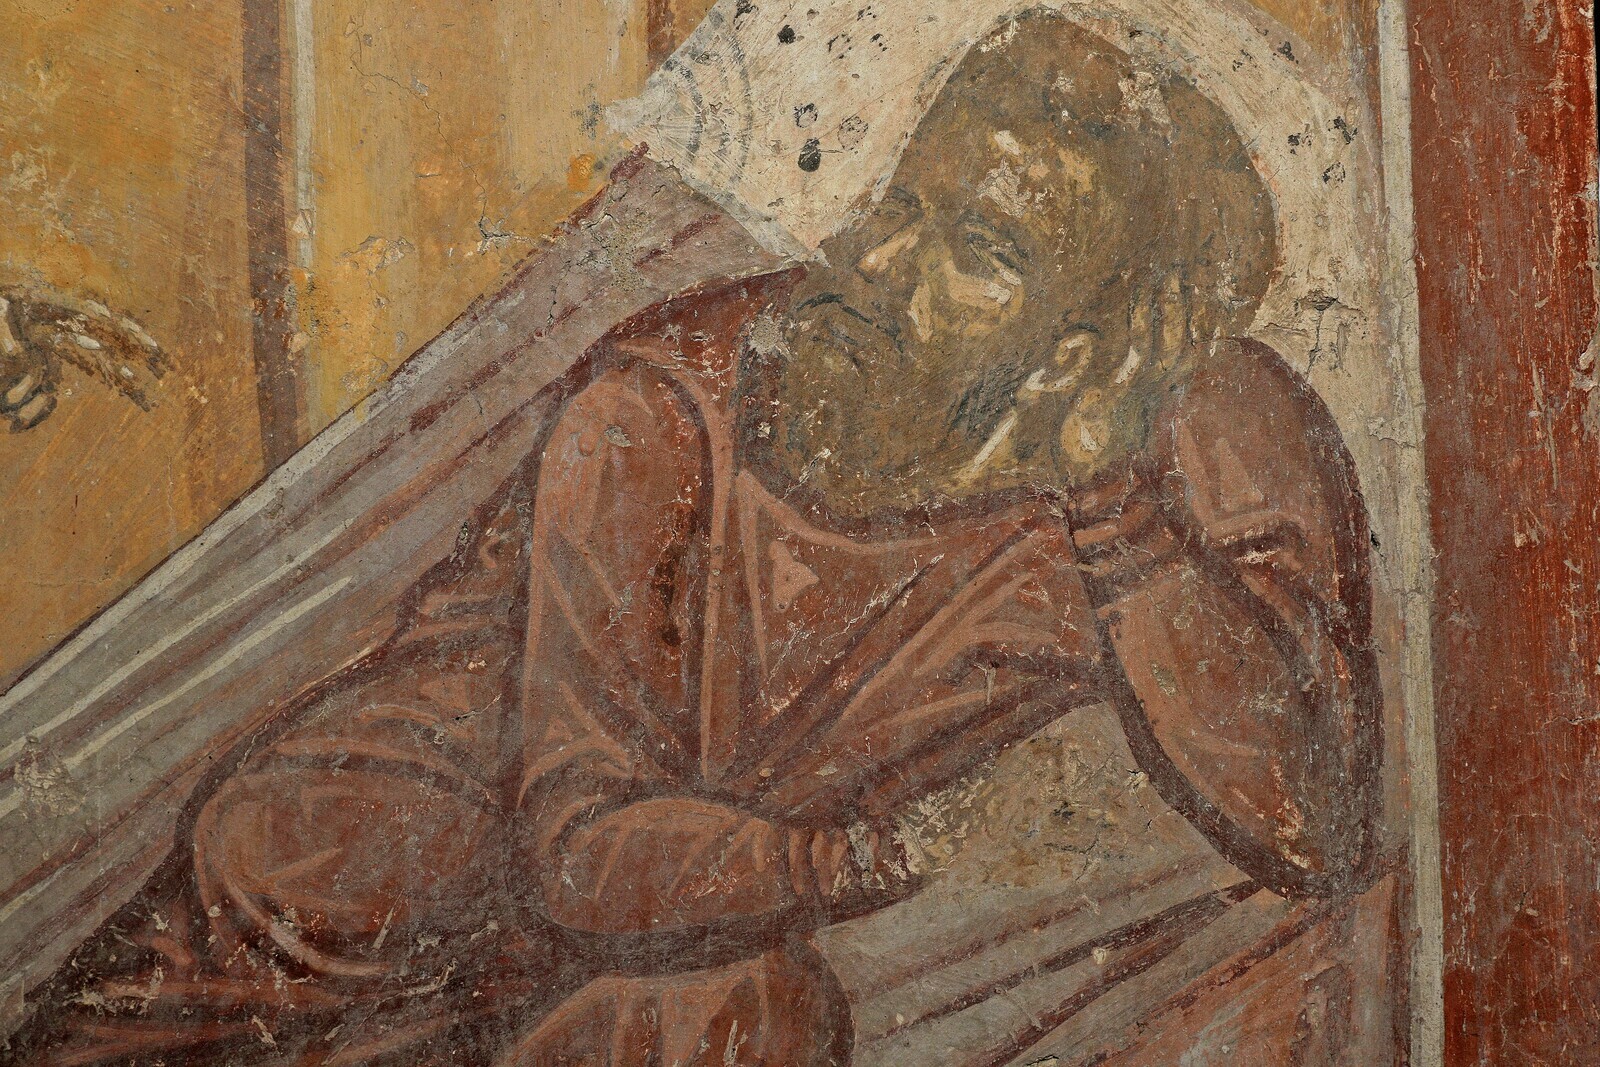 Saint Nicholas Appearing to Constantine and Ablabius in Their Dreams, detail